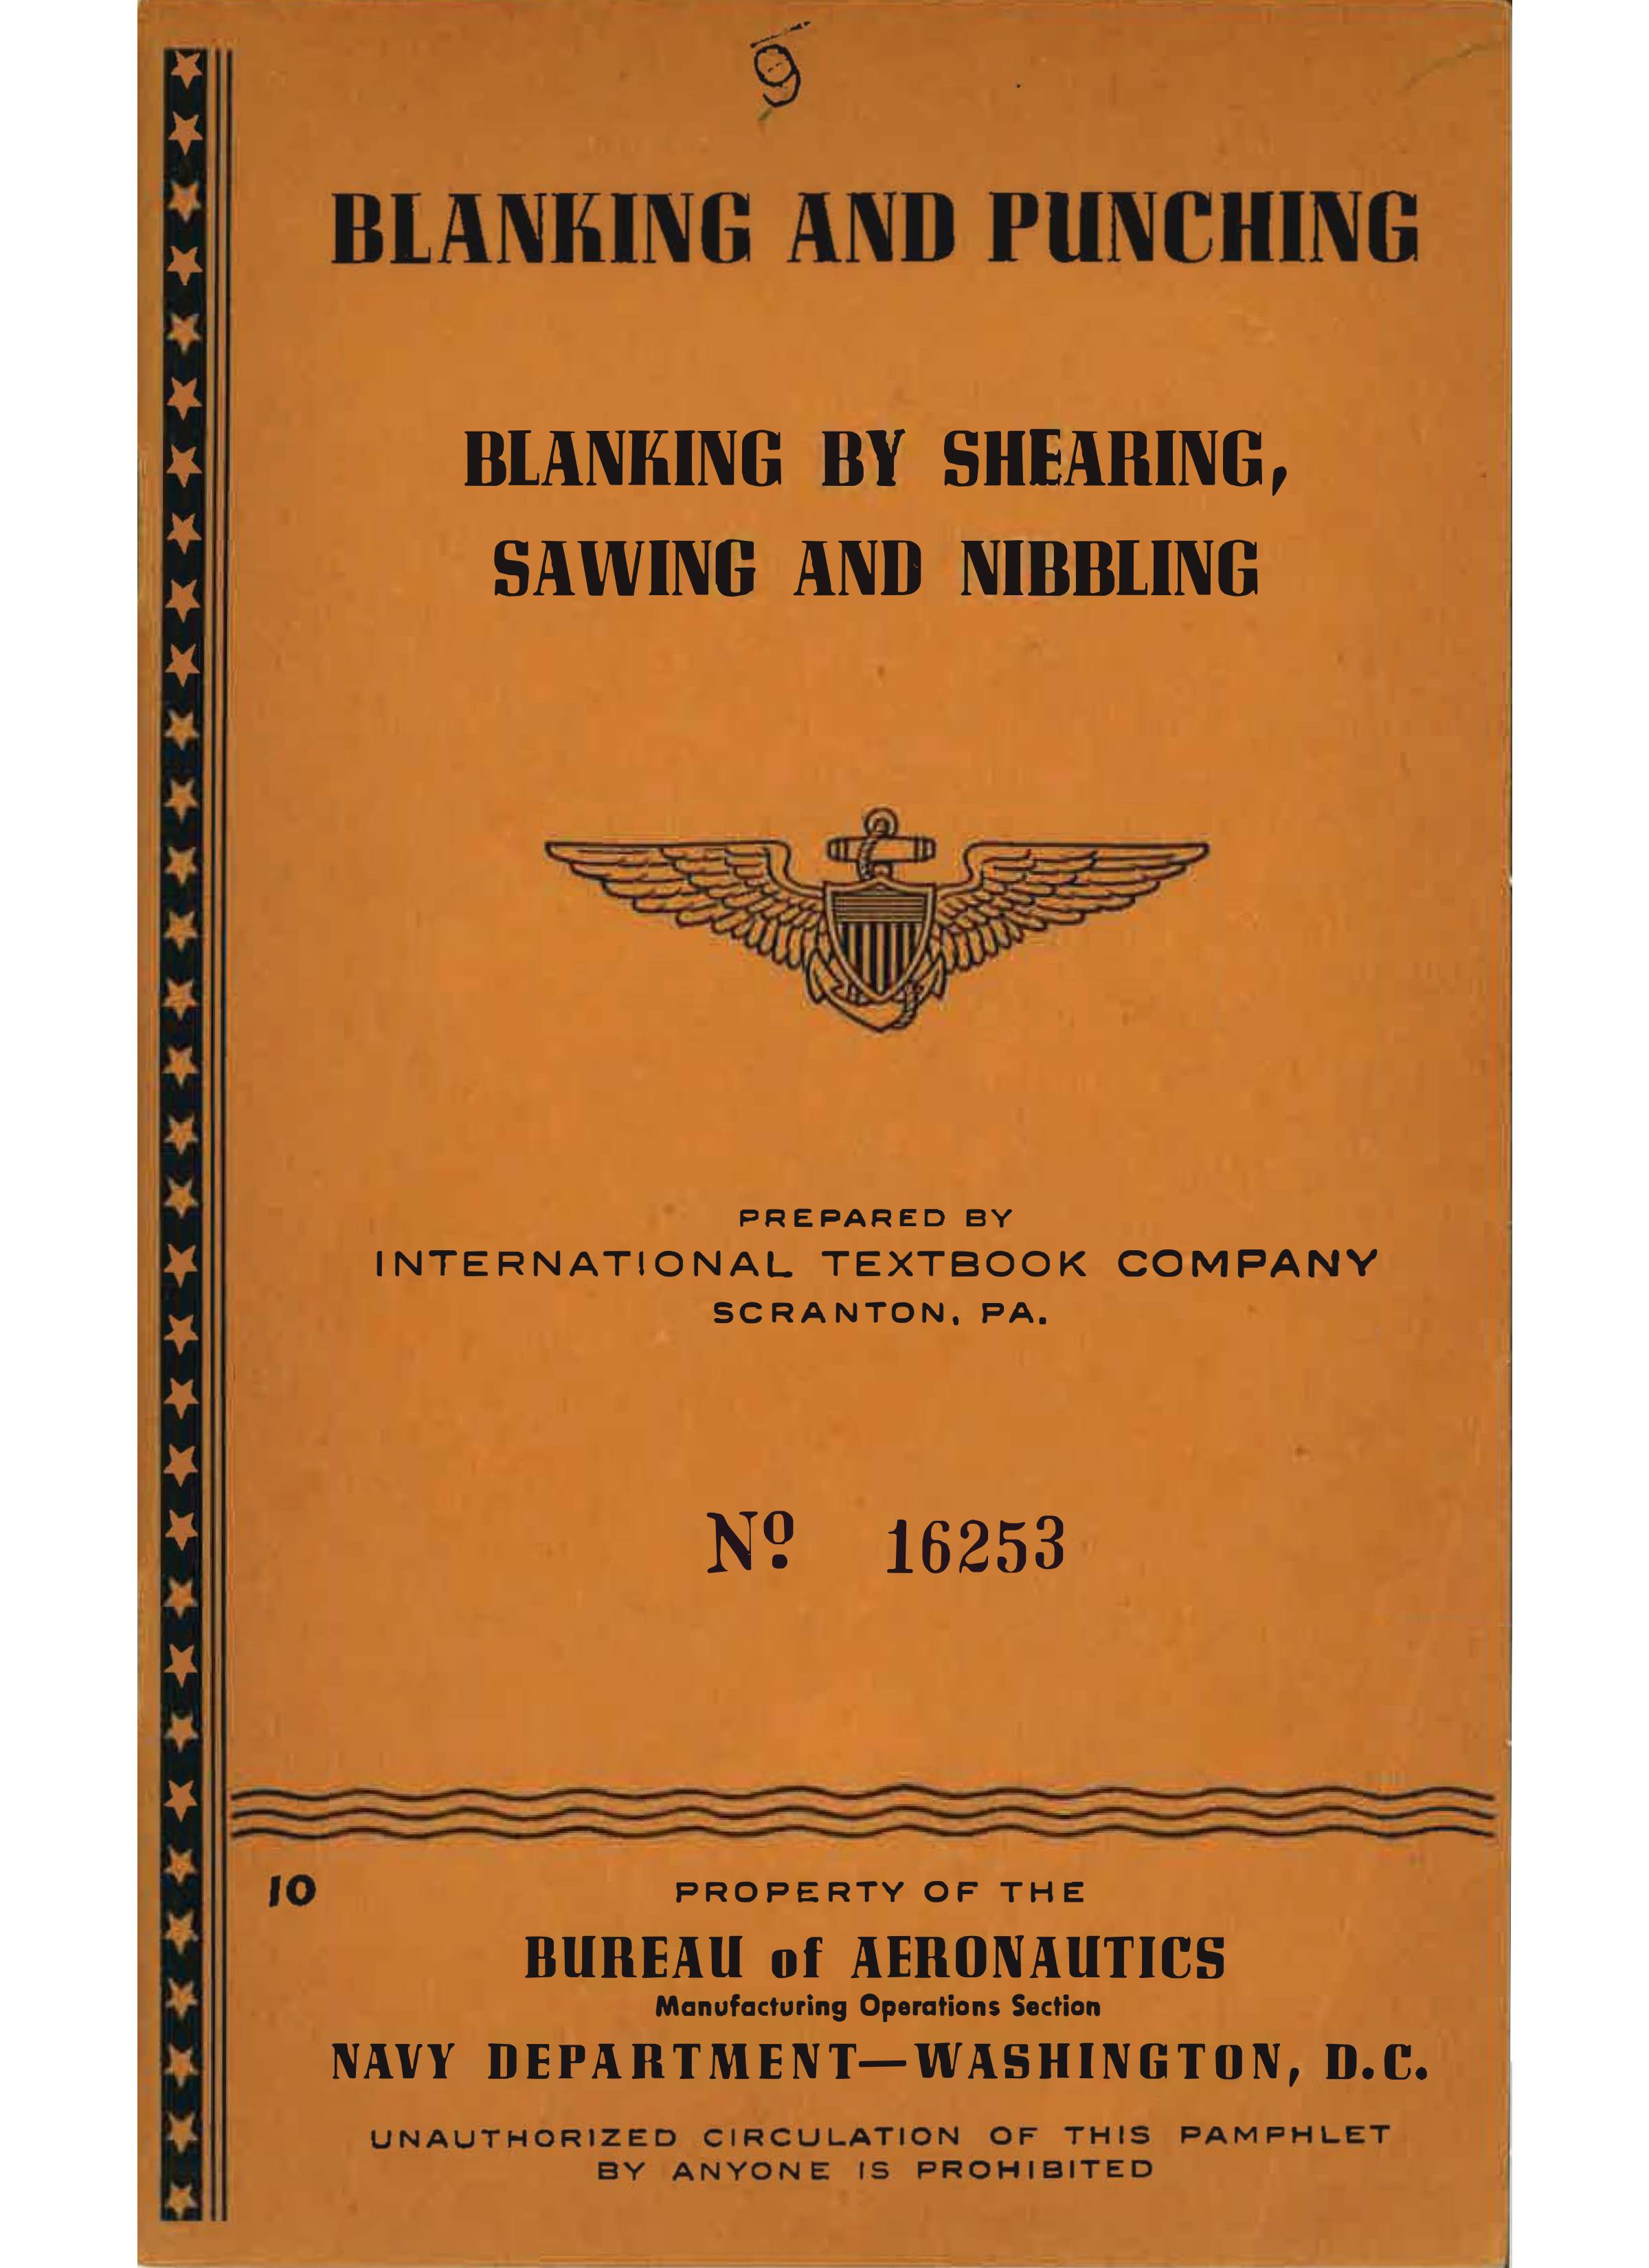 Sample page 1 from AirCorps Library document: Blanking & Punching - Shearing, Sawing, Nibbling - Bureau of Aeronautics